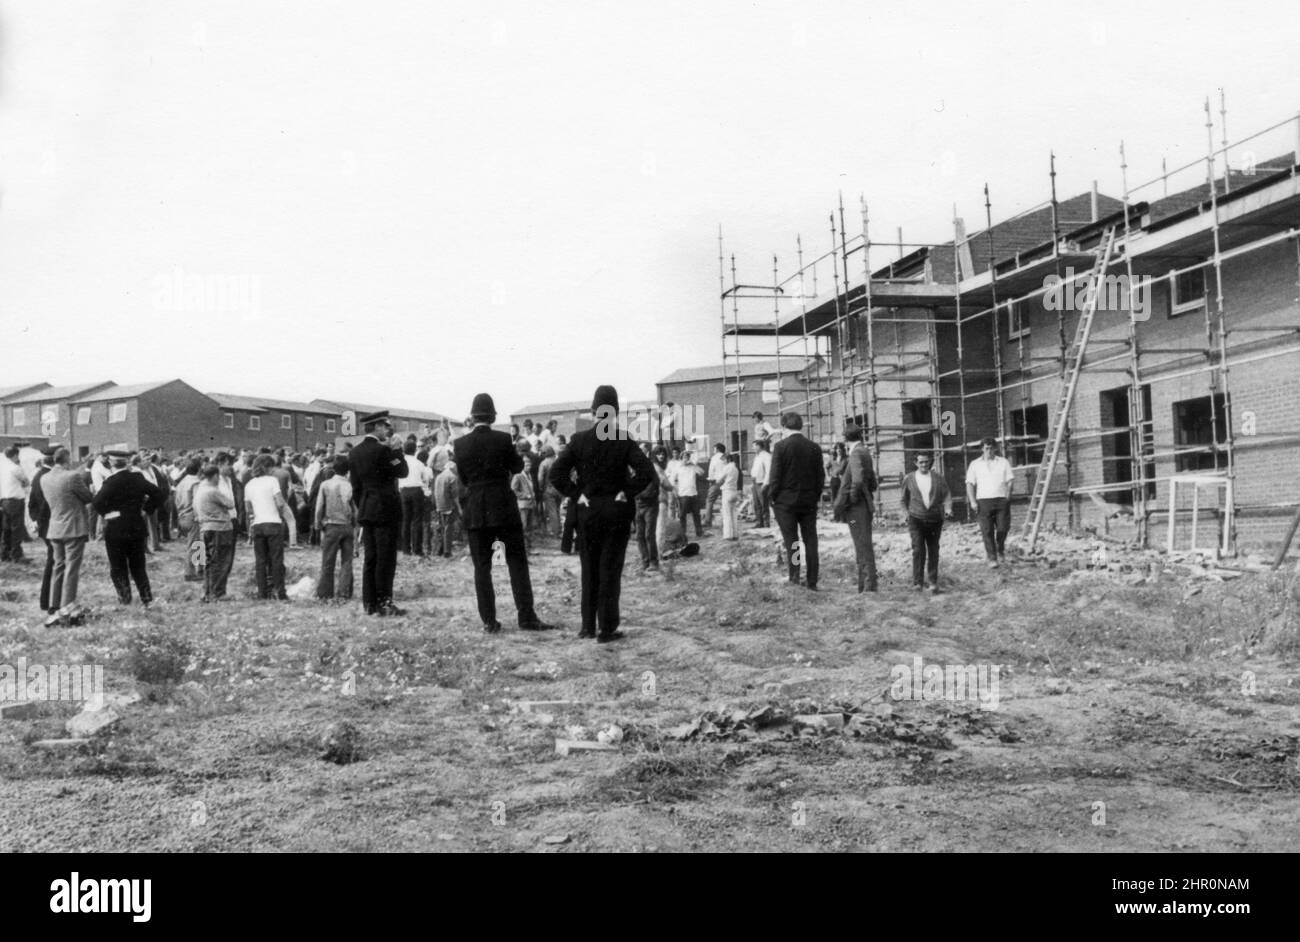 Building workers flying pickets on Brookside housing construction site September 6th 1972. Union of Construction, Allied Trades and Technicians UCATT members picketed building sites in Shrewsbury and Telford which led to court case were Ricky Tomlinson and Des Warren were imprisoned for conspiracy. Their convictions were overturned by the court of appeal in 2021. Stock Photo